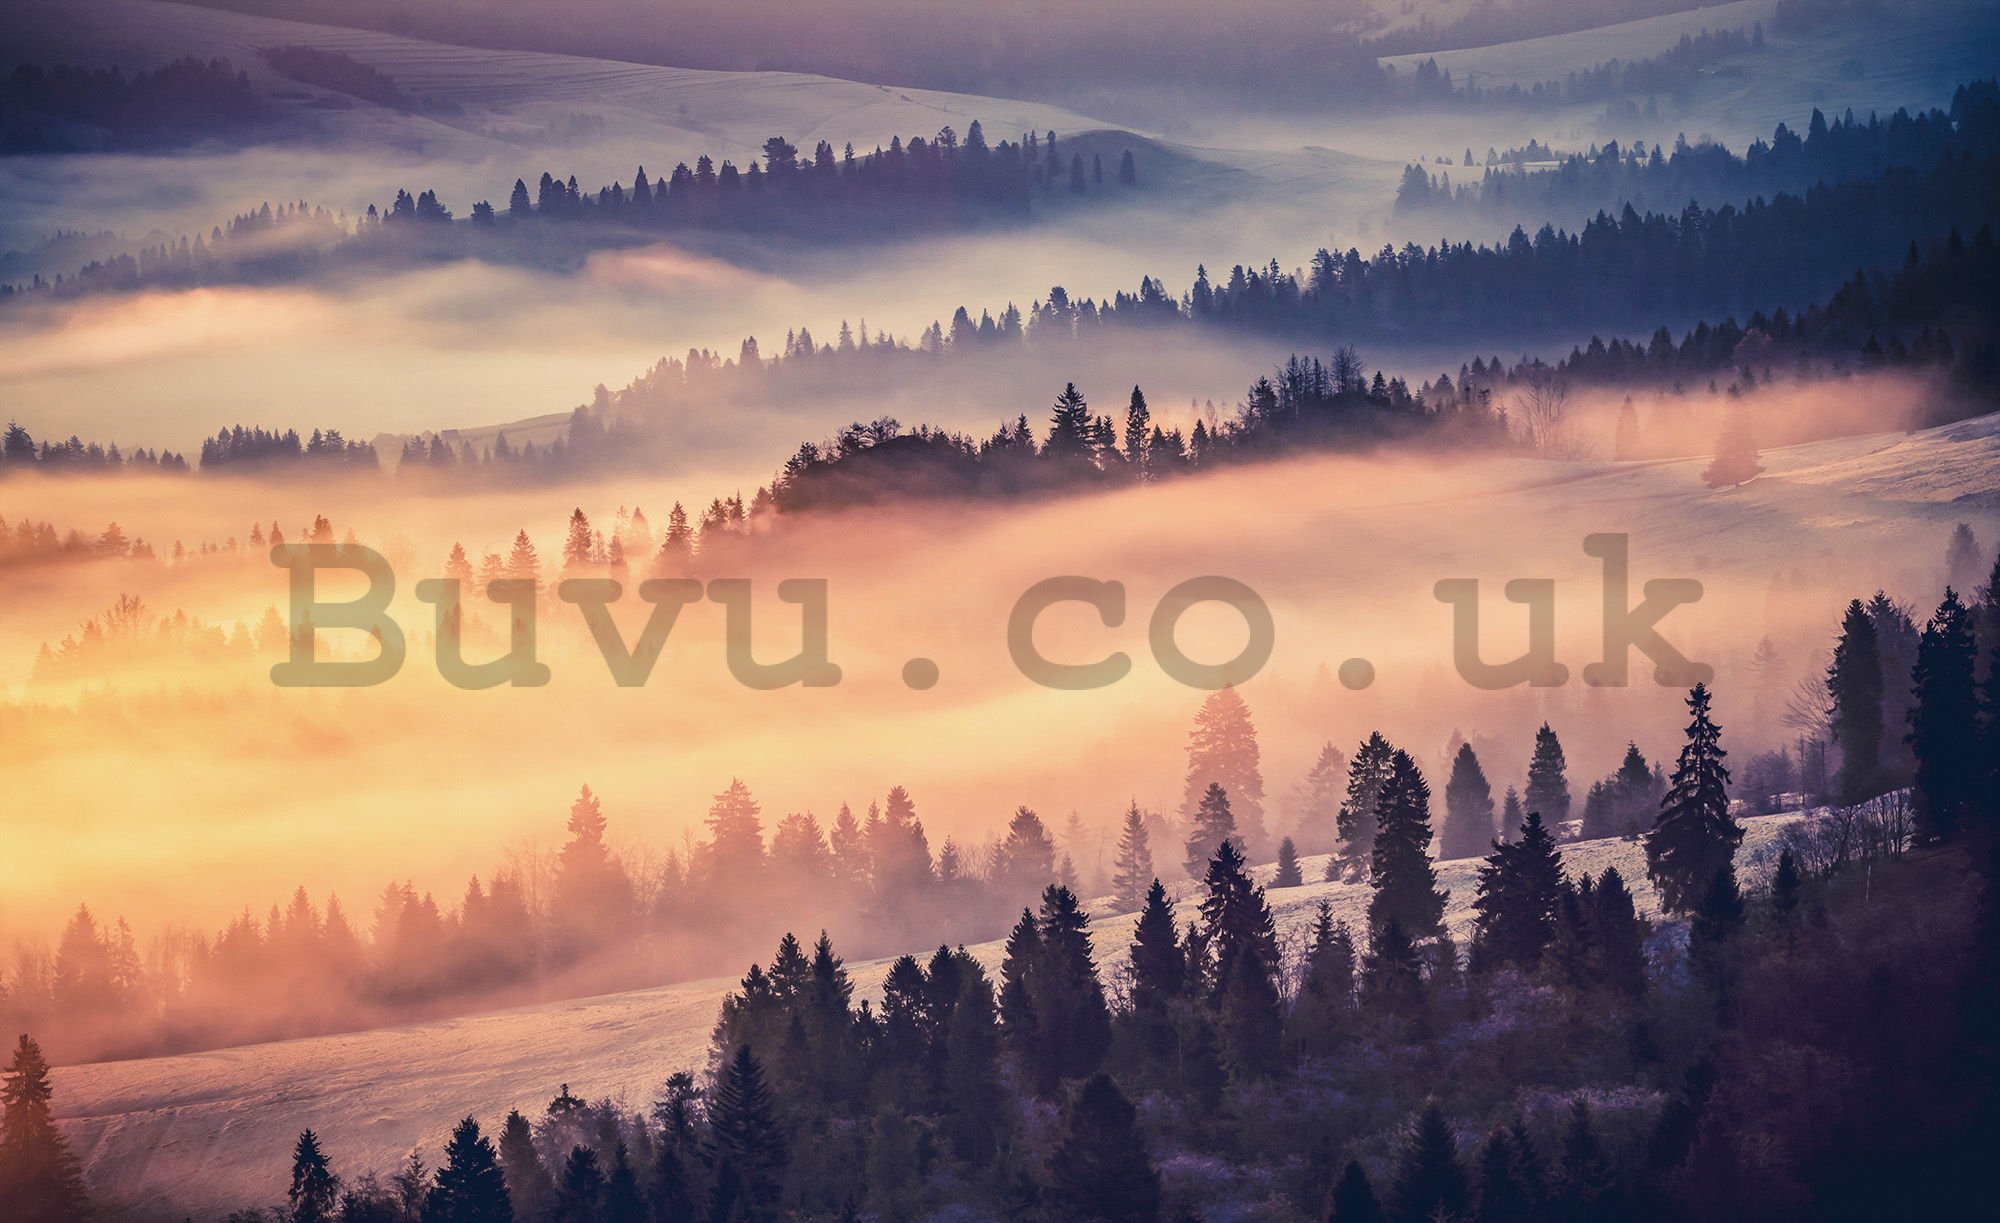 Wall mural: Fog over the mountains - 254x368 cm